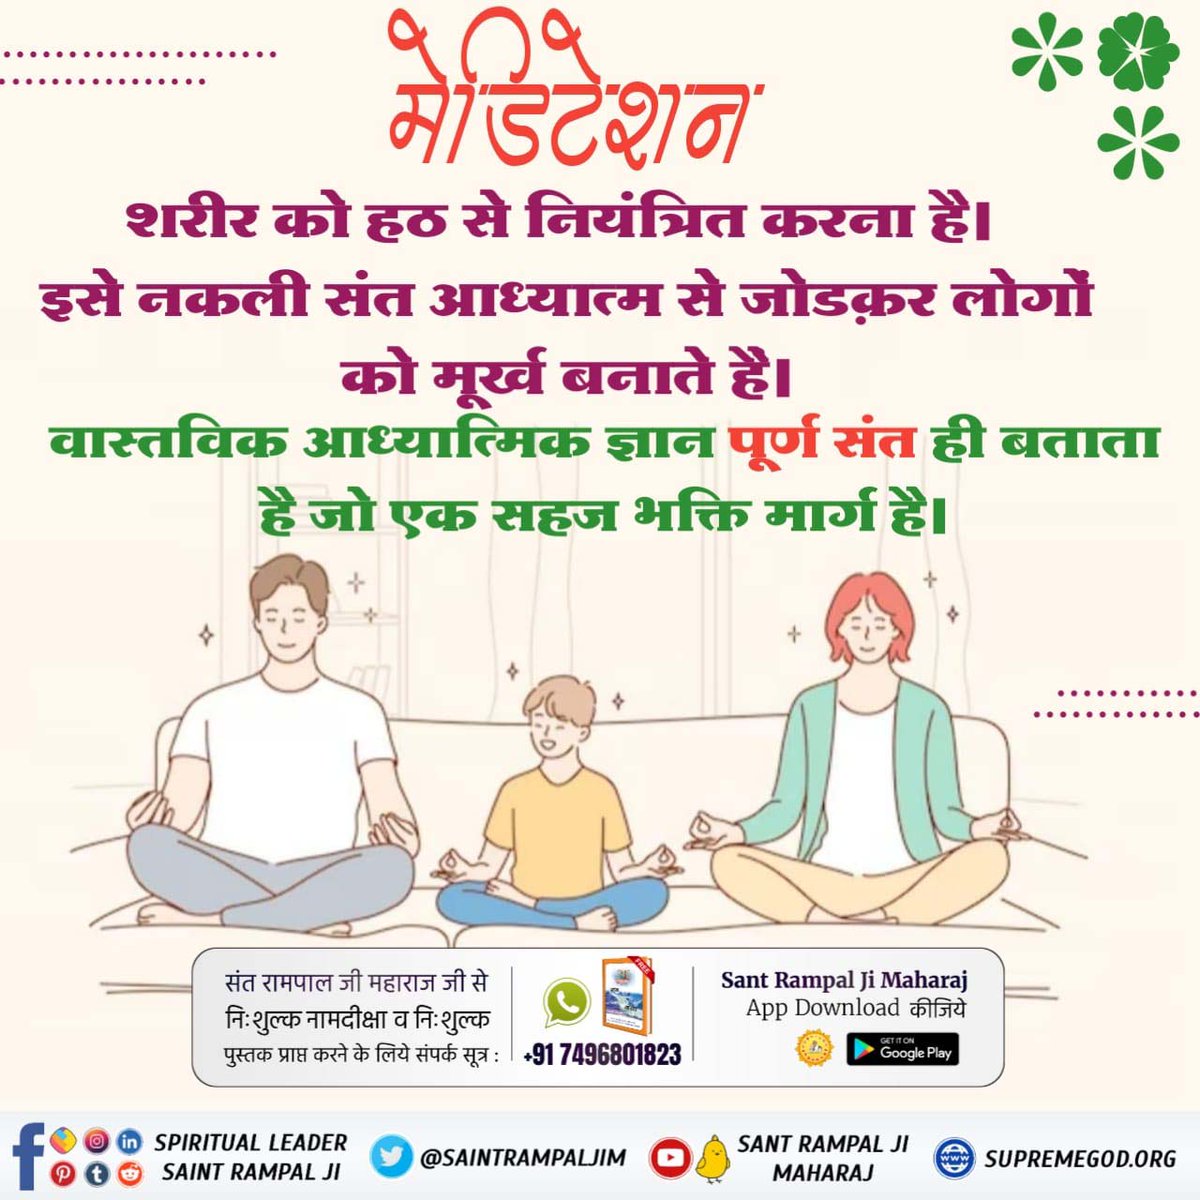 #What_Is_Meditation
These fake religious gurus are ruining the lives of people by promoting fake sadhna and want to push people directly into hell by making them do Hatha Yoga